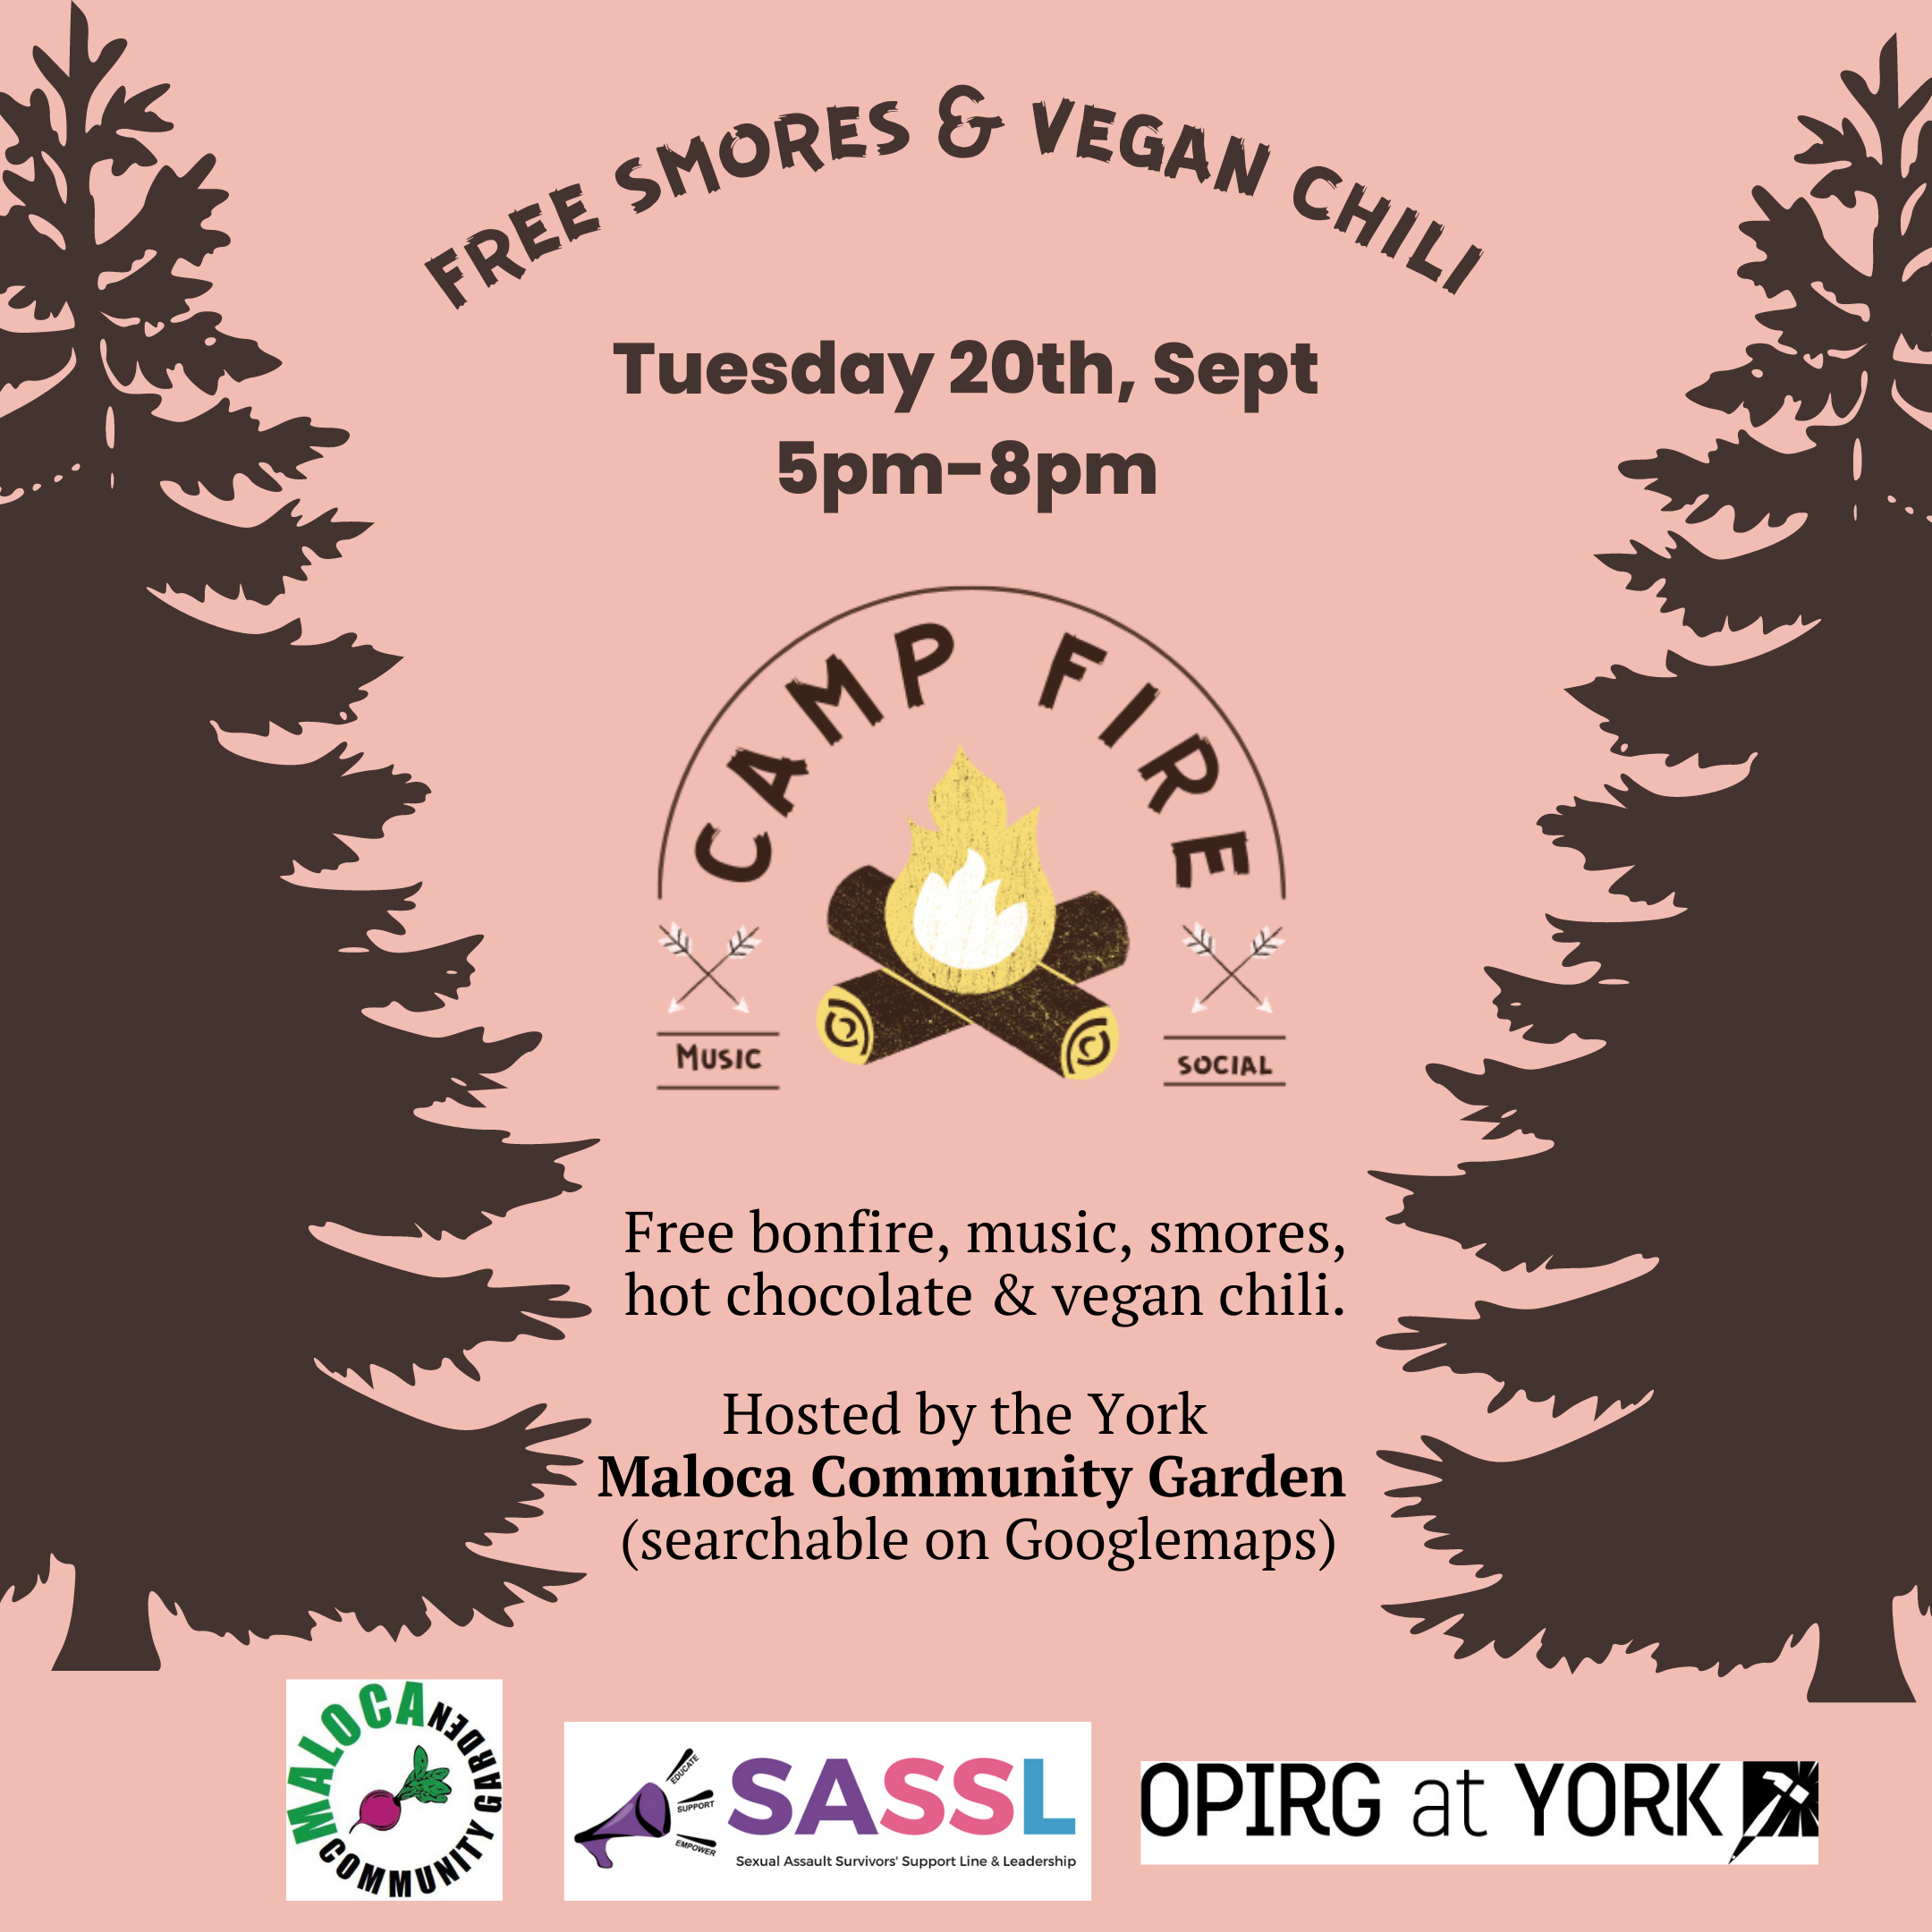 the silhouette of pine trees border either side of the poster; there is amber orange background recalling fall leaves. A chunky black text curved over the top says: free smores & vegan chili. Below that it says: Tuesday 20th, Sept 5pm-8pm. There is a graphic of a small bonfire with crossed arrows on either side and the small words “music” and “social.”